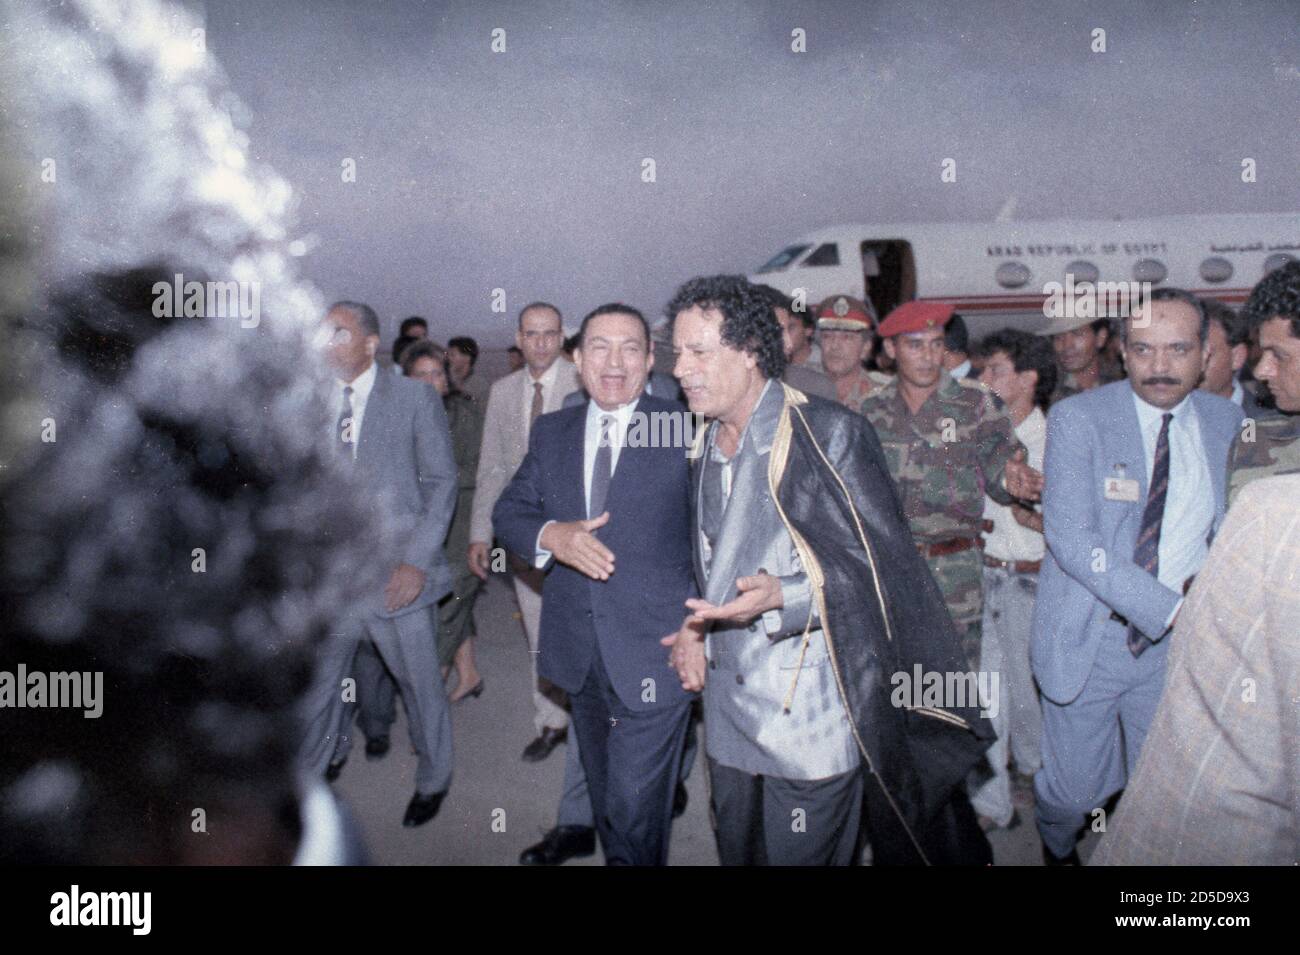 Egyptian President Hosni Mubarak (L) jokes with Libyan leader Colonel Muammar Gaddafi upon his arrival at Benghazi airport August 27, 1991. Leaders and representatives from around the world are gathering in the city for the inauguration of the Great Man Made River project, designed to provide water for the north of the country at a cost of over $20 billion.   REUTERS/Jon Bainbridge   BEST QUALITY AVAILABLE Stock Photo